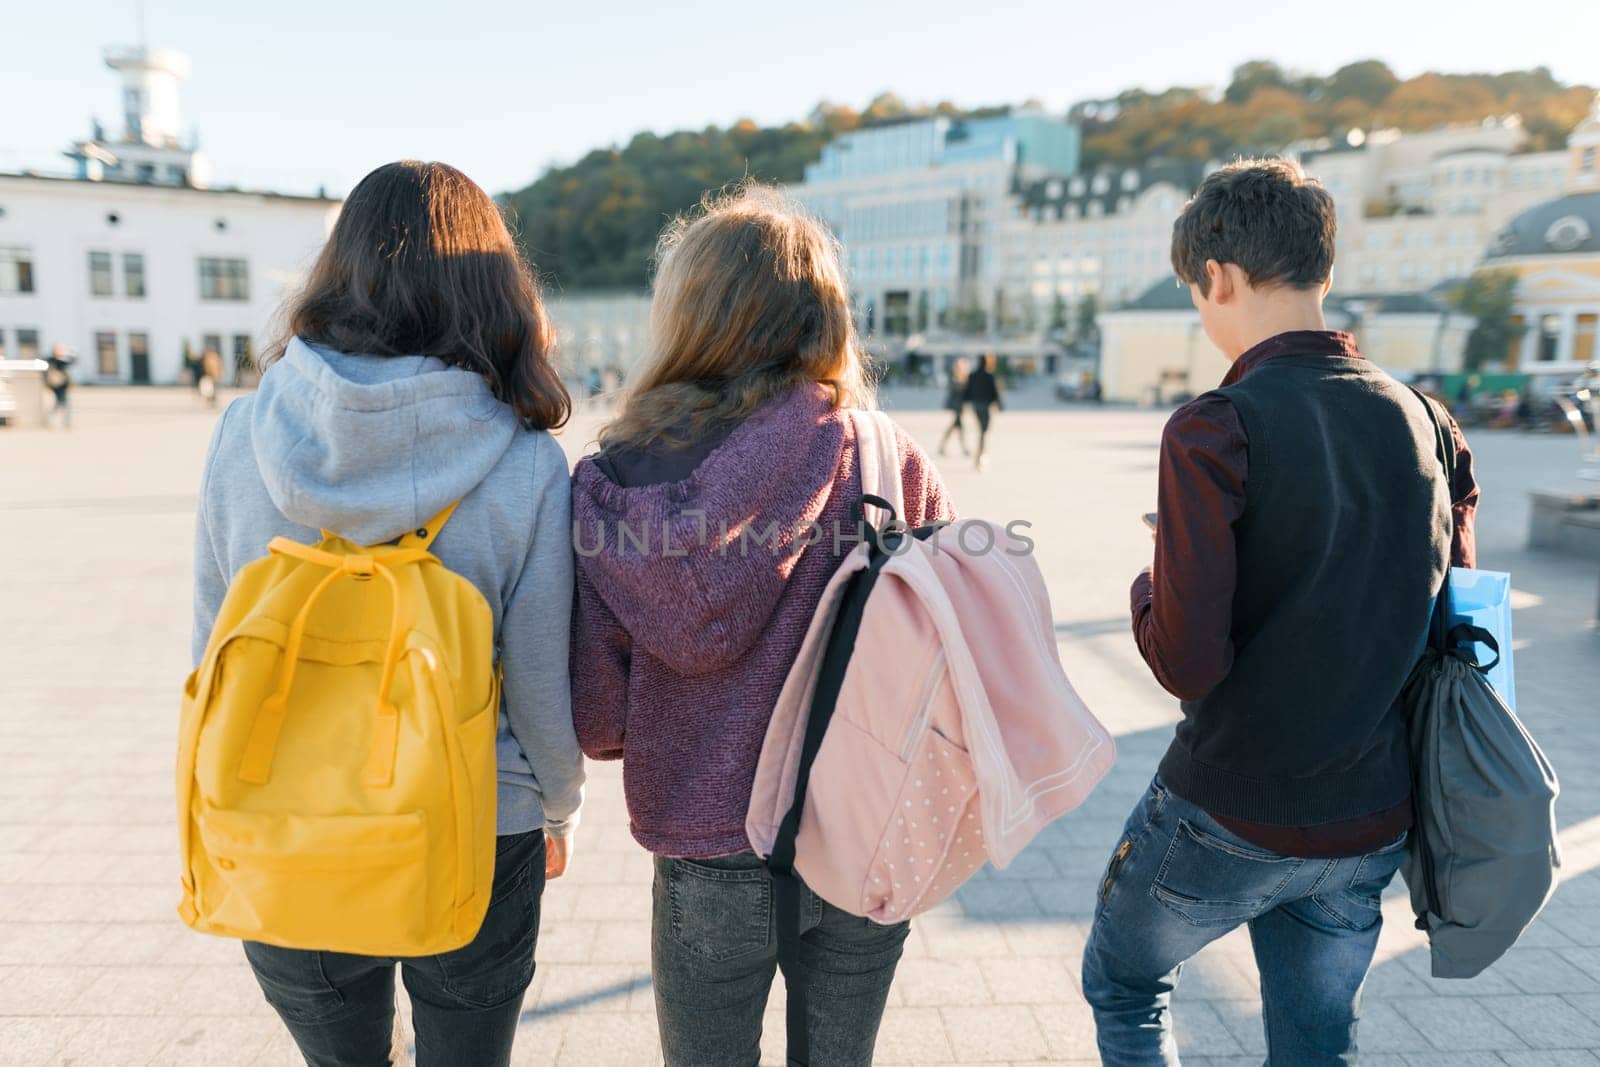 View from the back on three high school students. City background, golden hour.